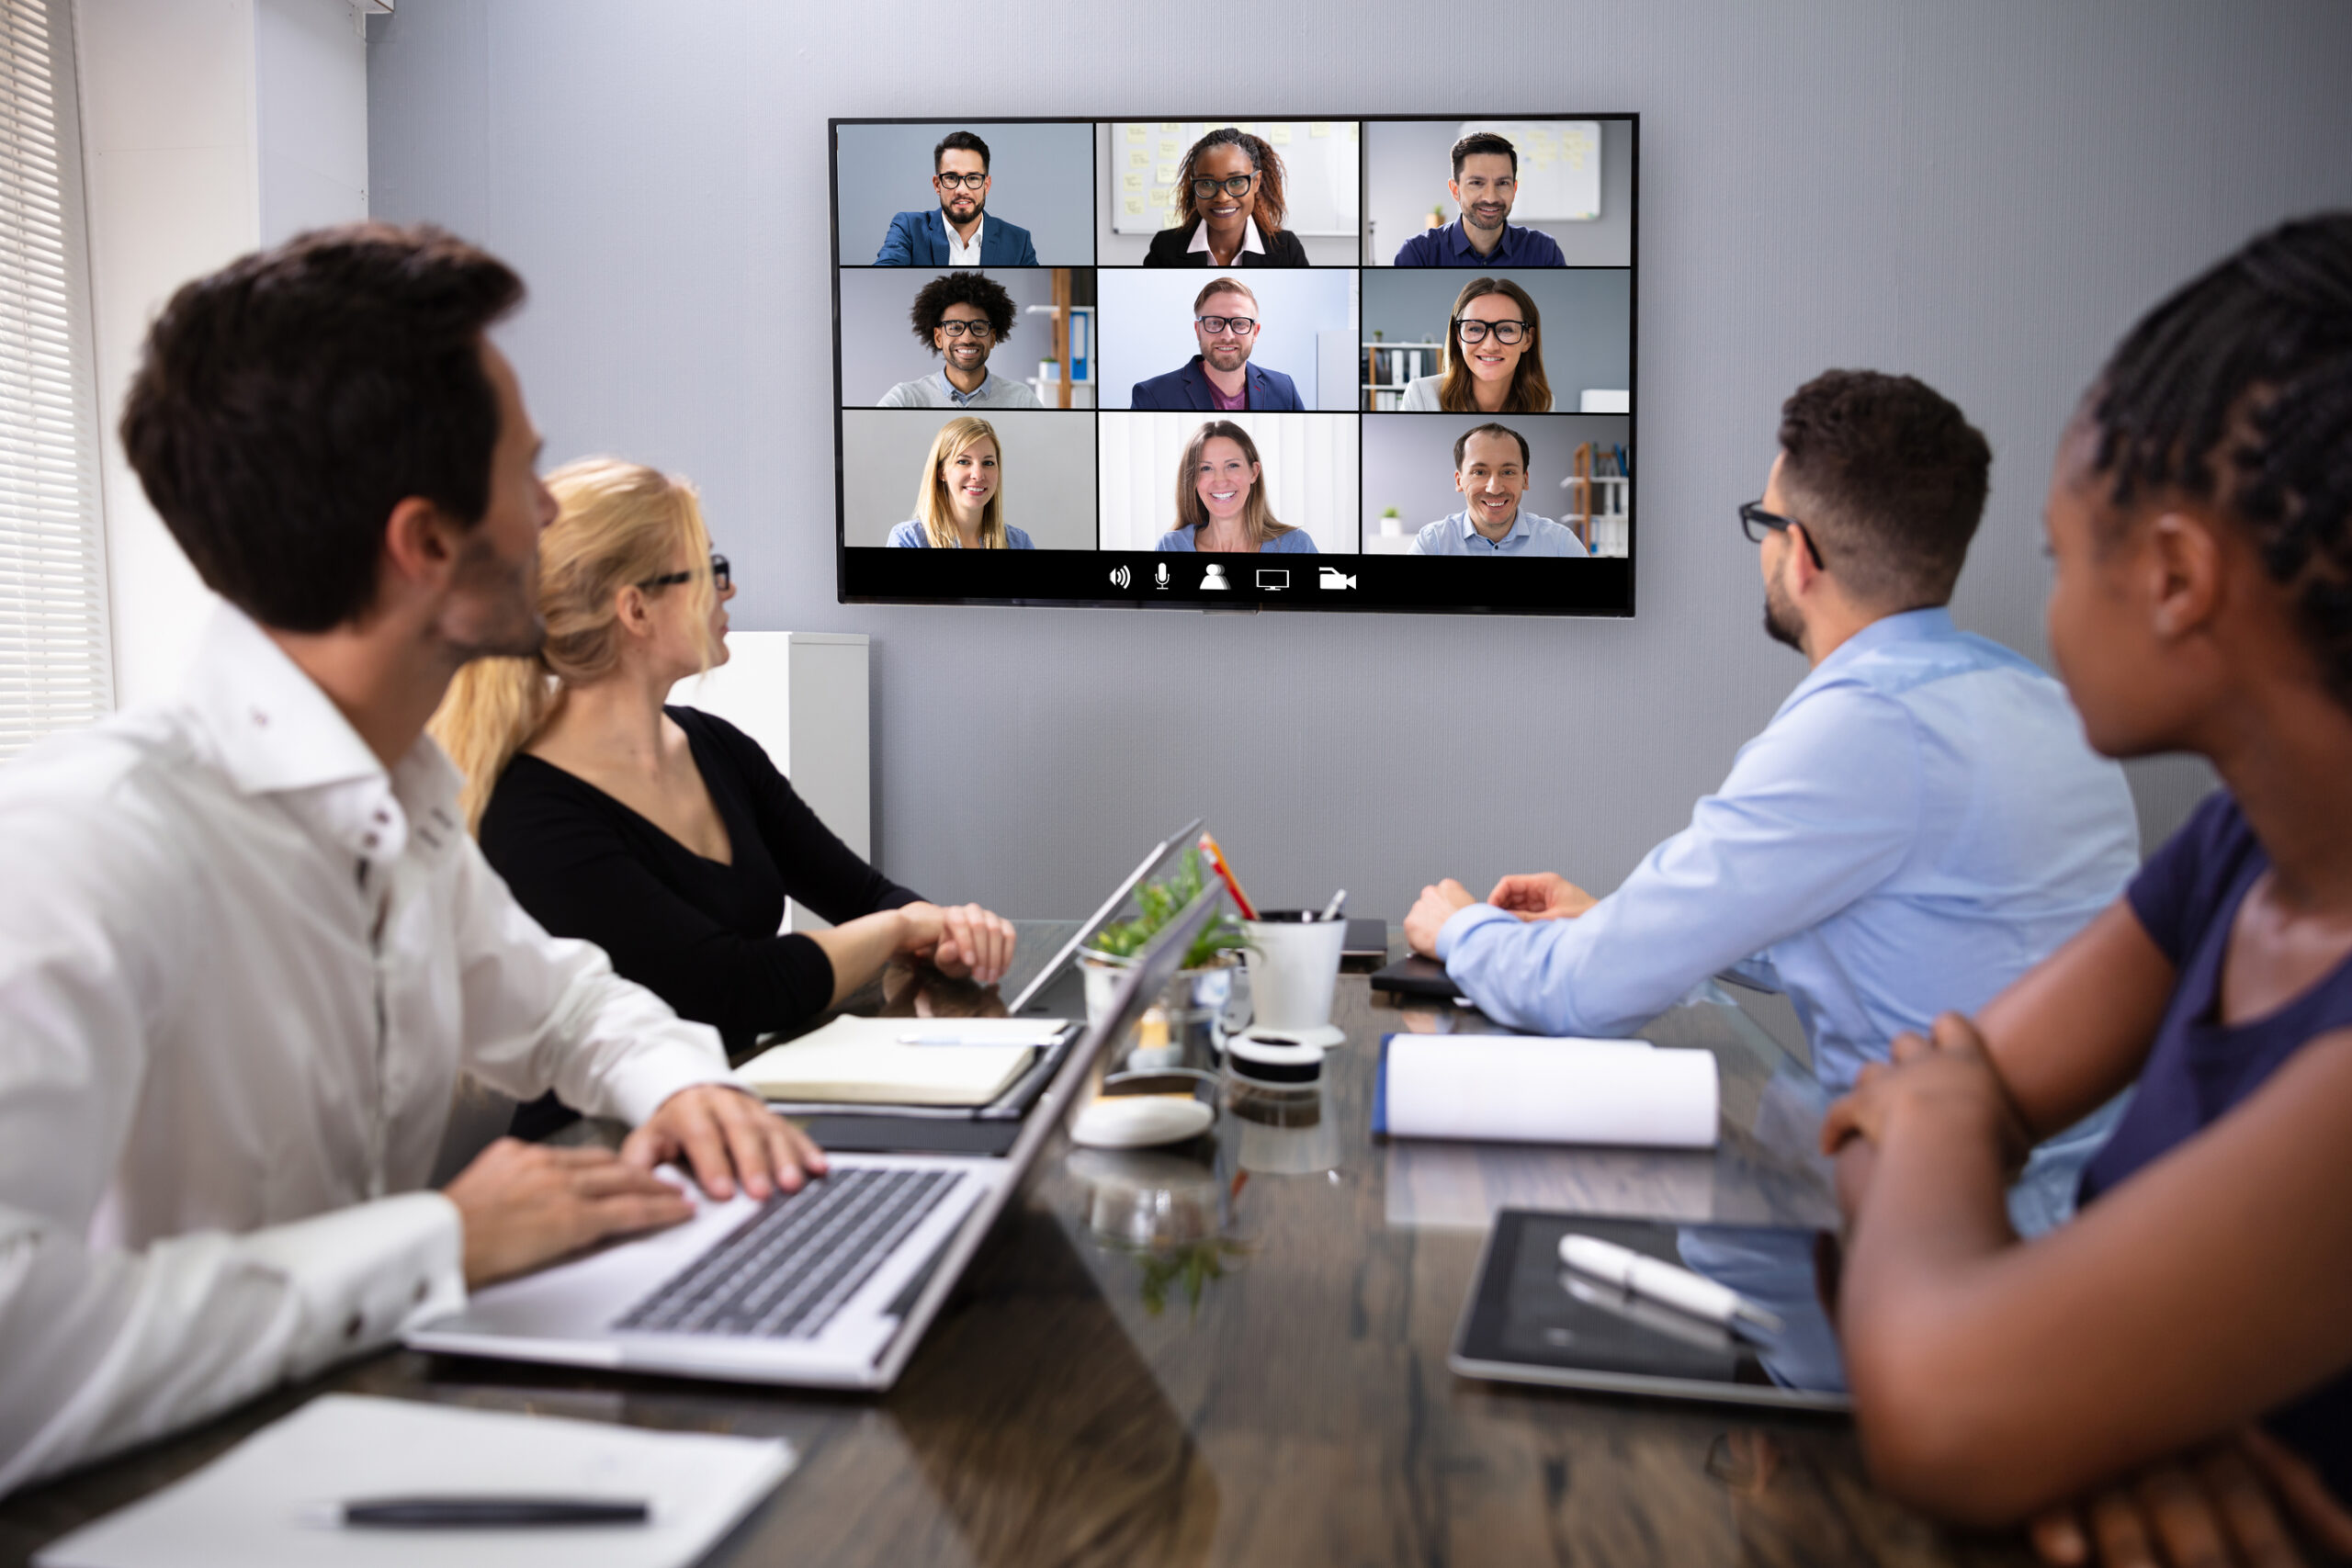 Conference Room as a Service is a Key Collaboration Solution